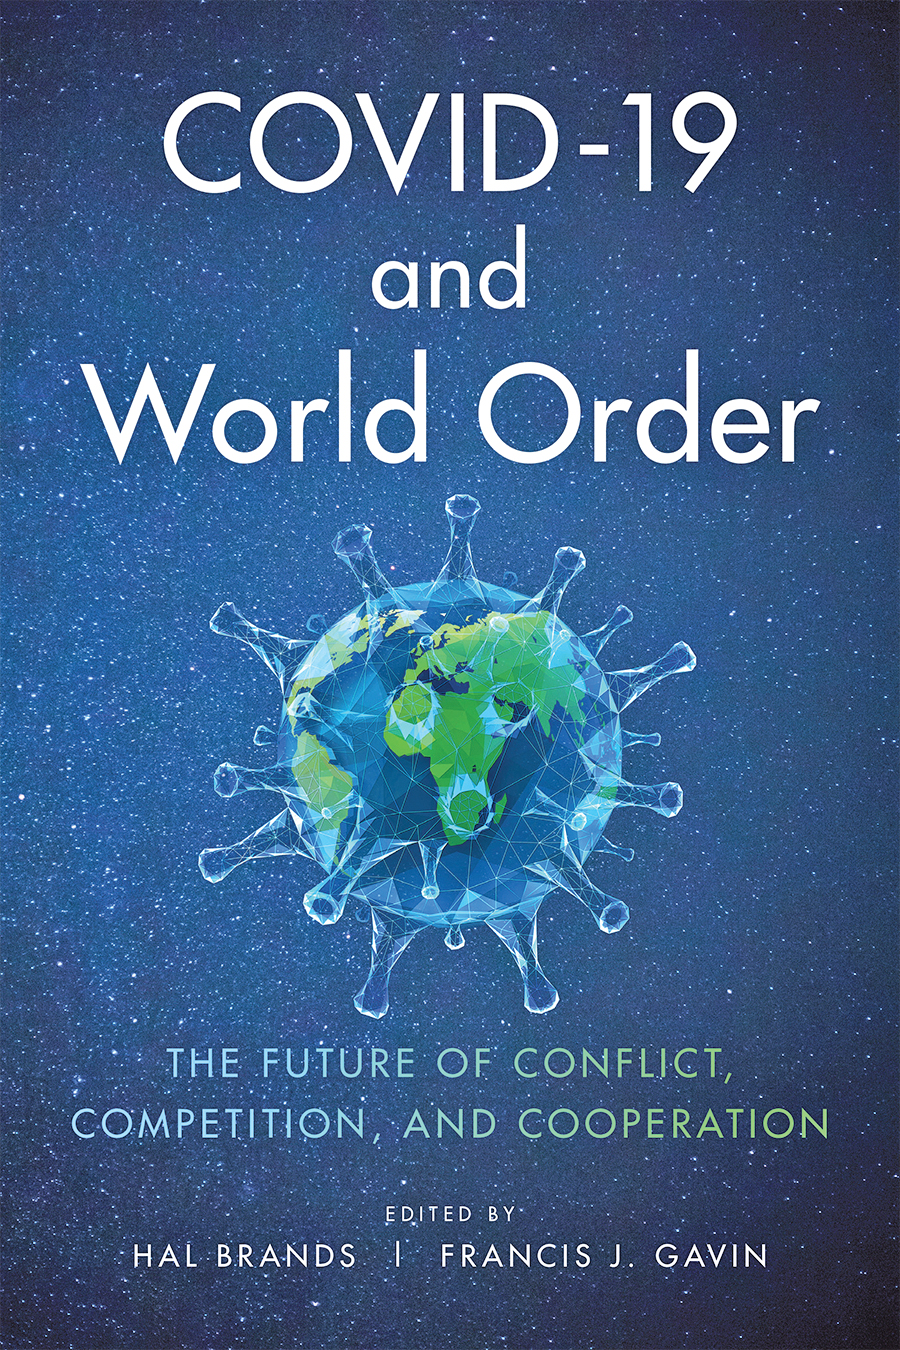 The question of what the world order will look like in a post-COVID world is one that Johns Hopkins University’s School of Advanced International Studies (SAIS) convened experts from within and outside the institution to discuss.